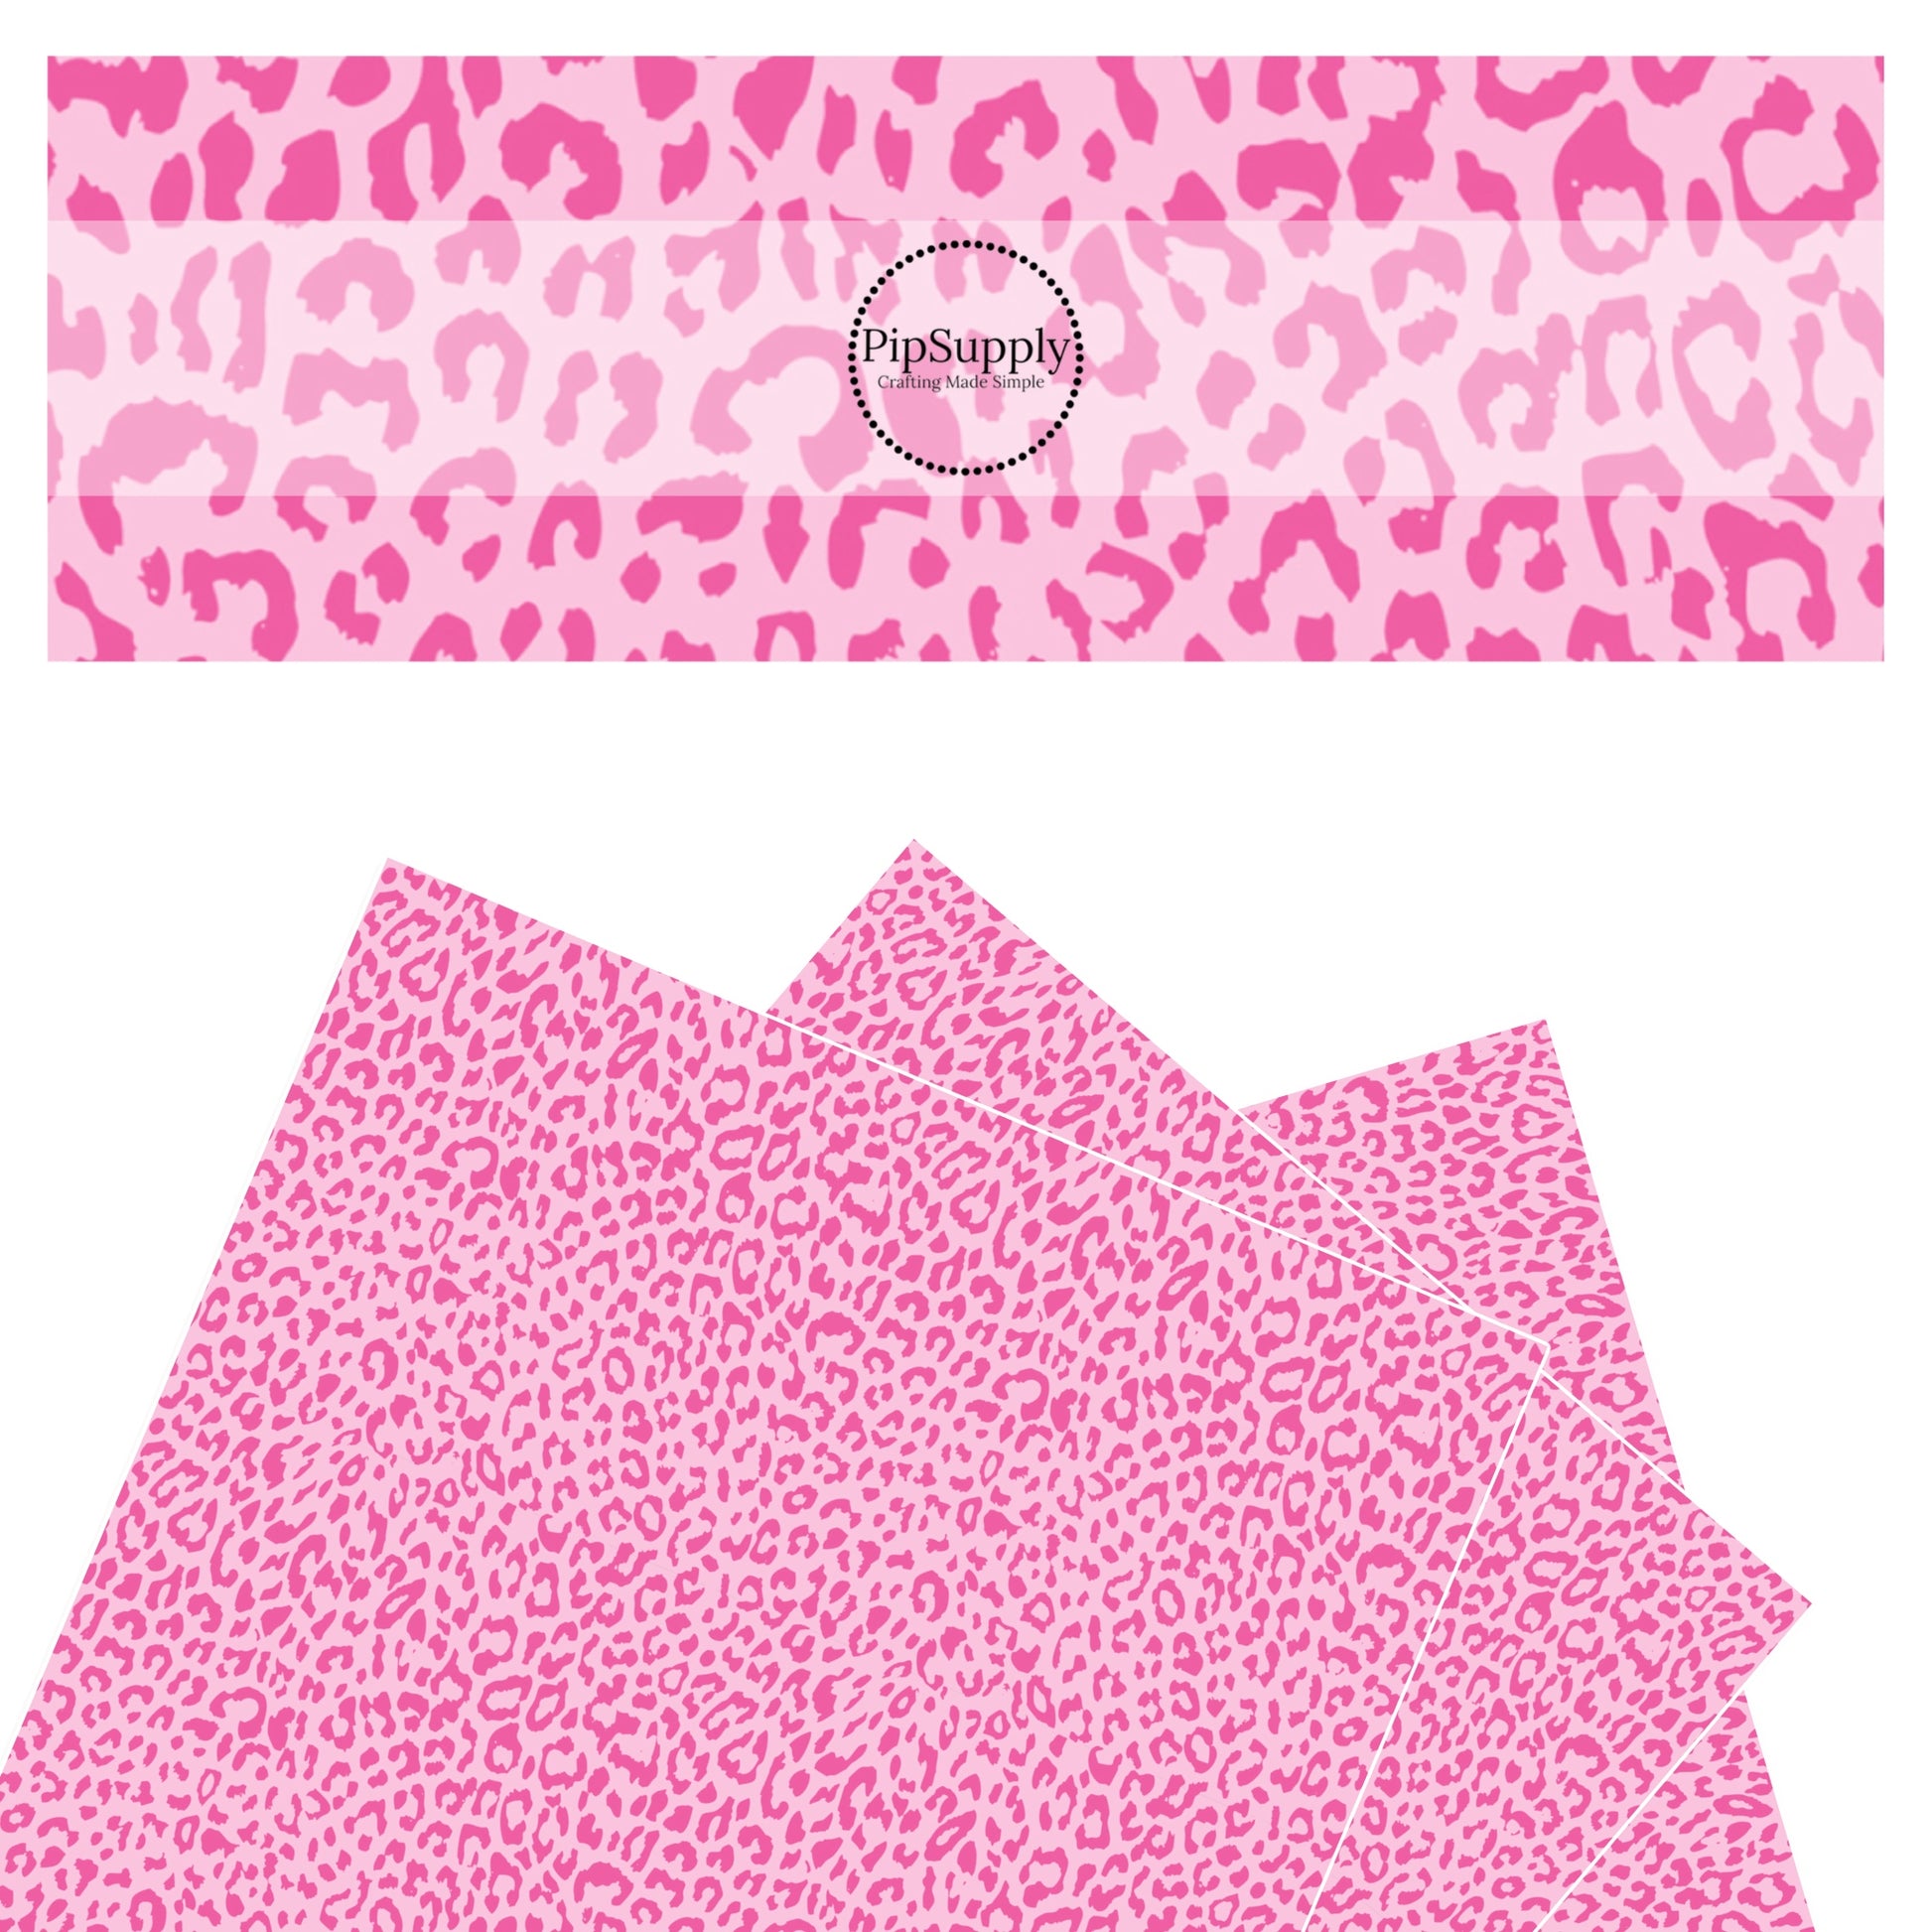 Hot pink scattered animal print on pink faux leather sheets